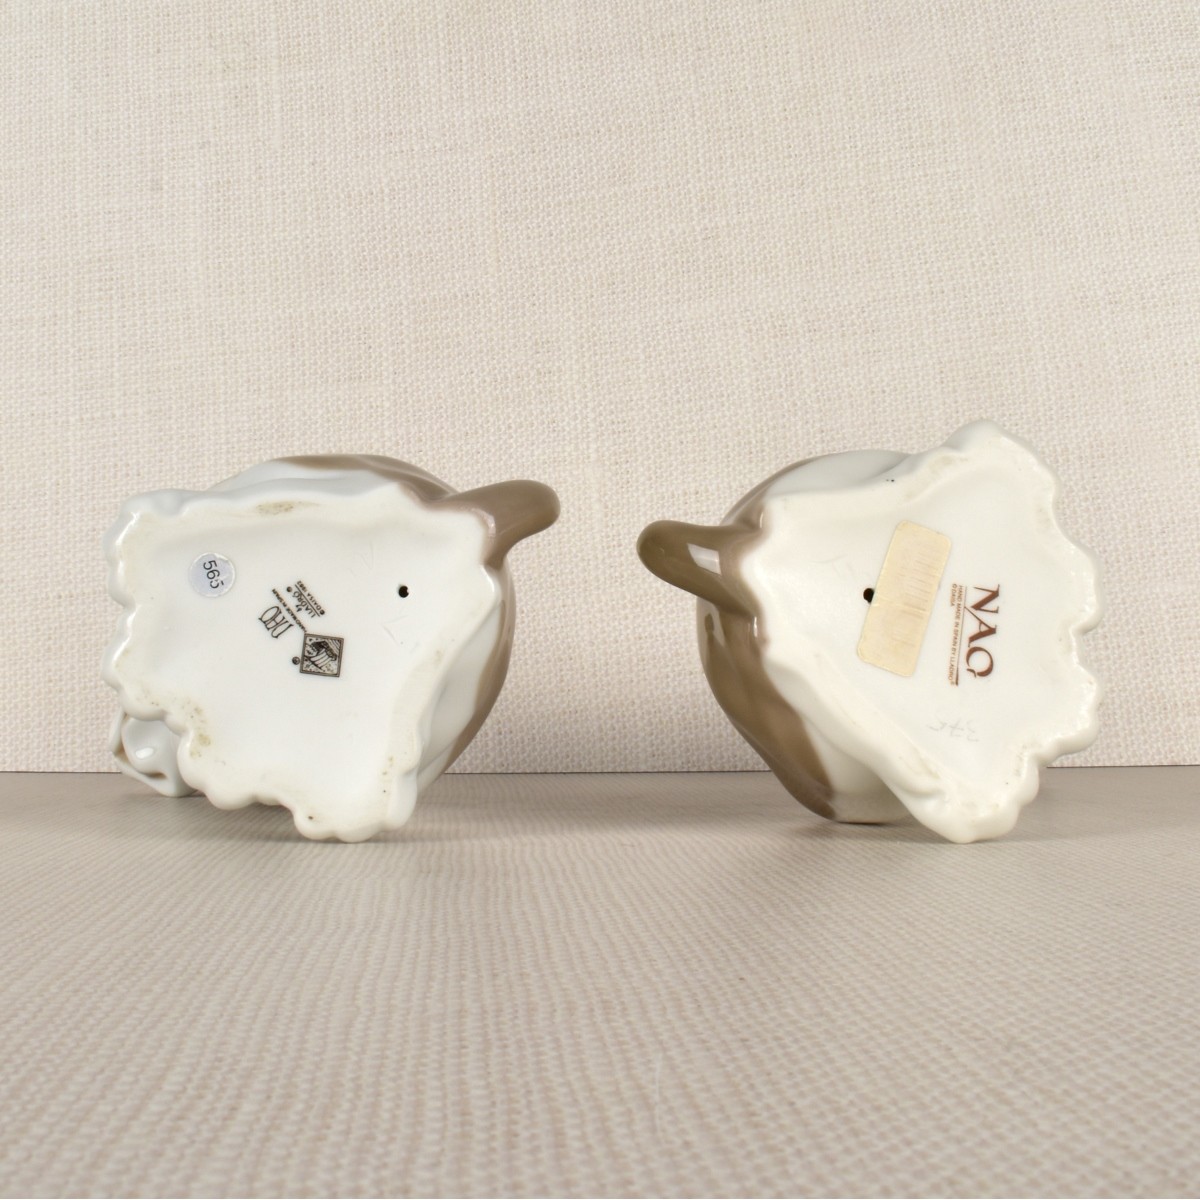 Pr Nao by Lladro Porcelain Hound Dogs